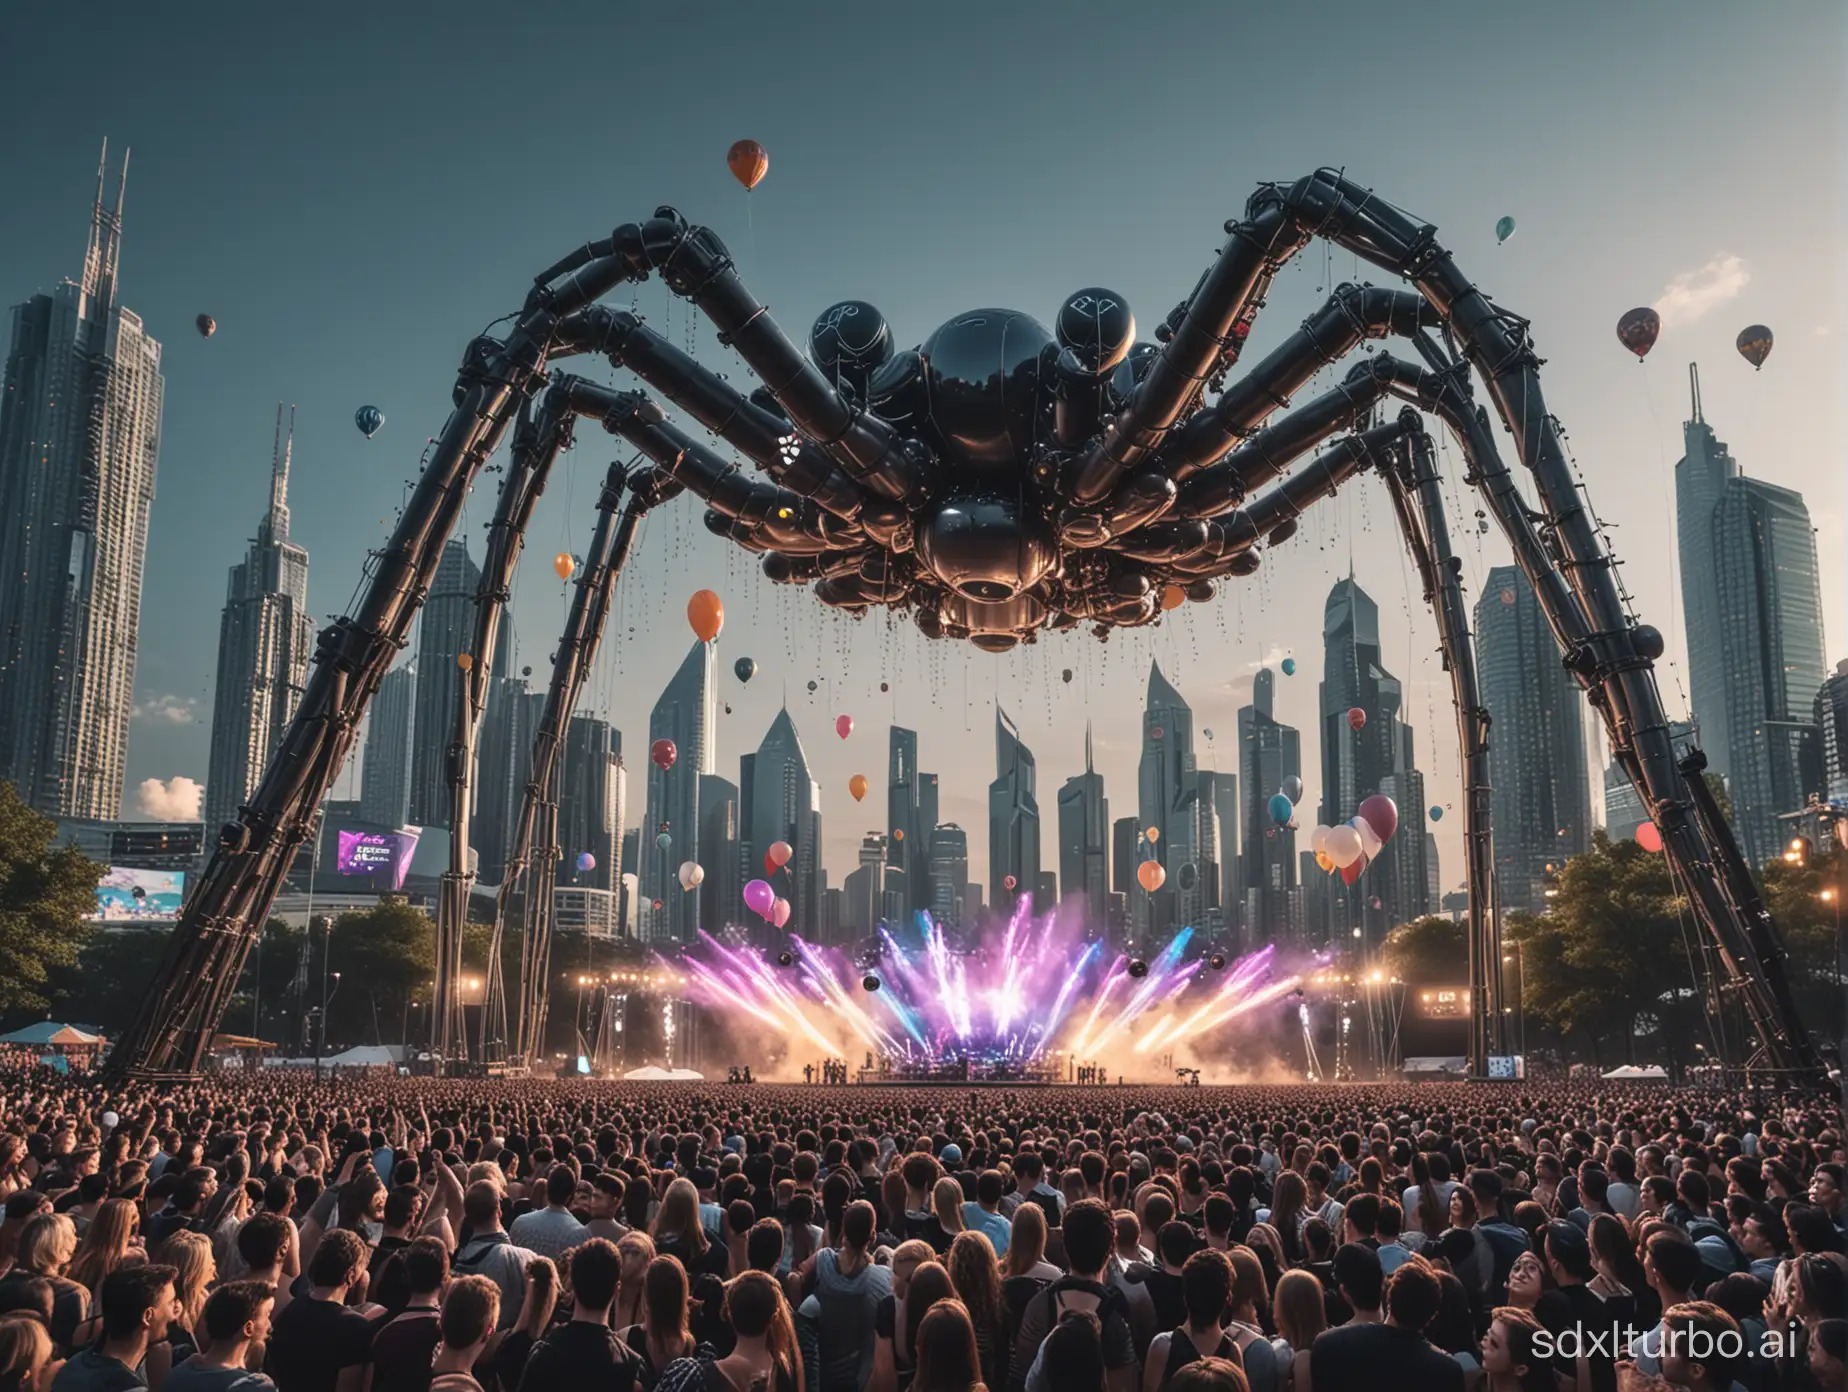 Music festival on the grass, square steel spider shaped stage, sci-fi industrial style, gorgeous beam lights, front view, many balloons in the sky, background of city skyscrapers